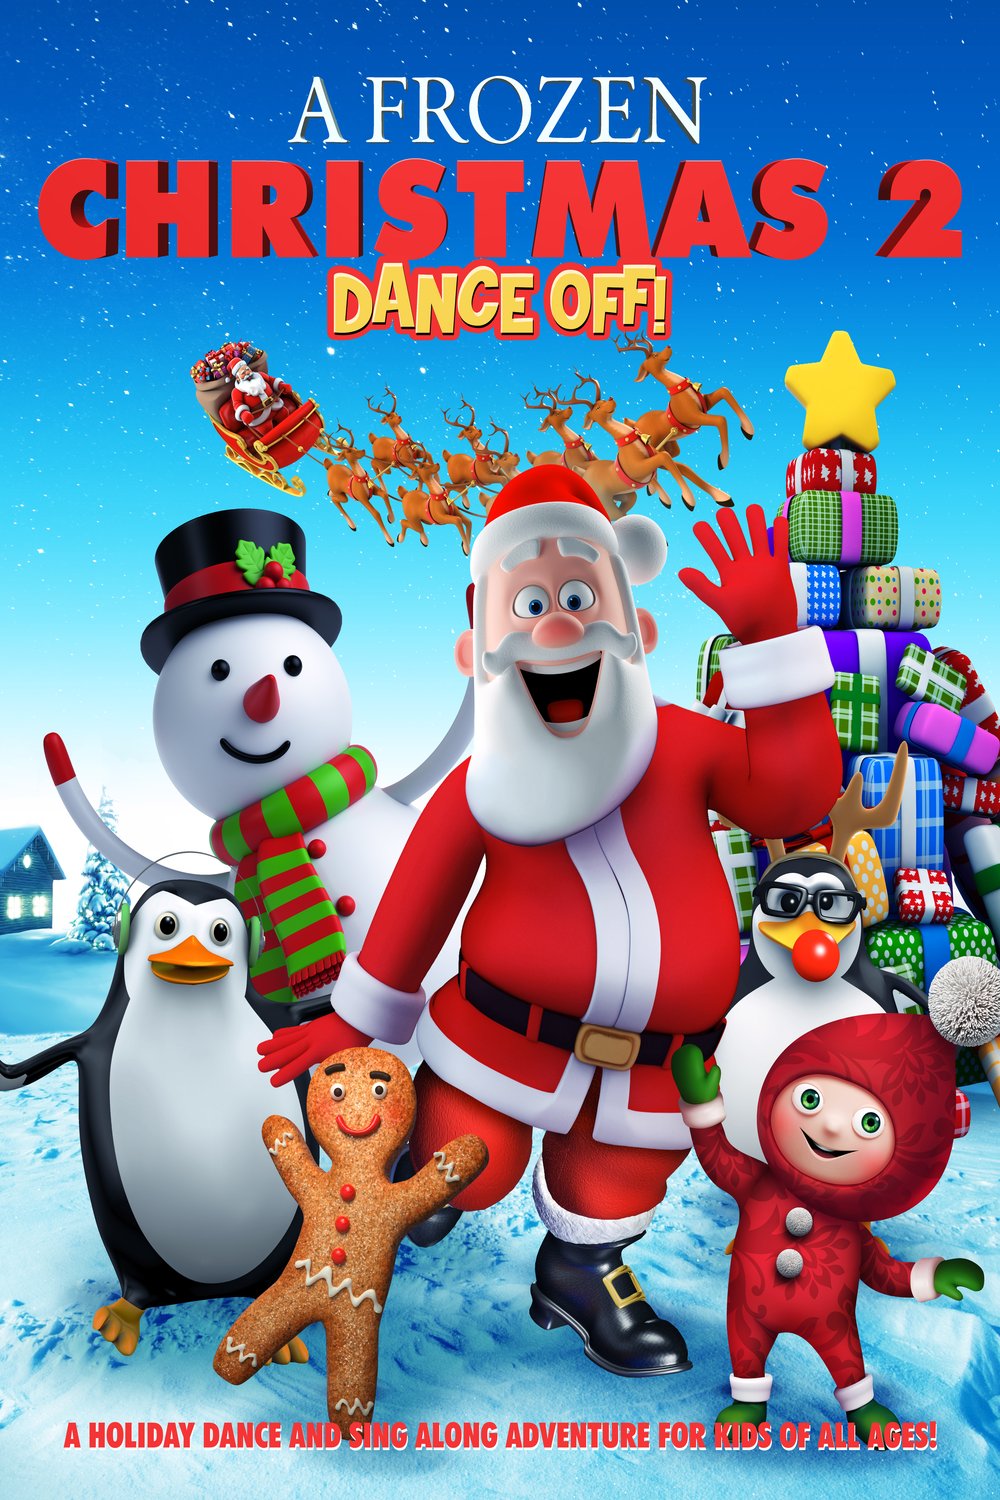 Poster of the movie A Frozen Christmas 2